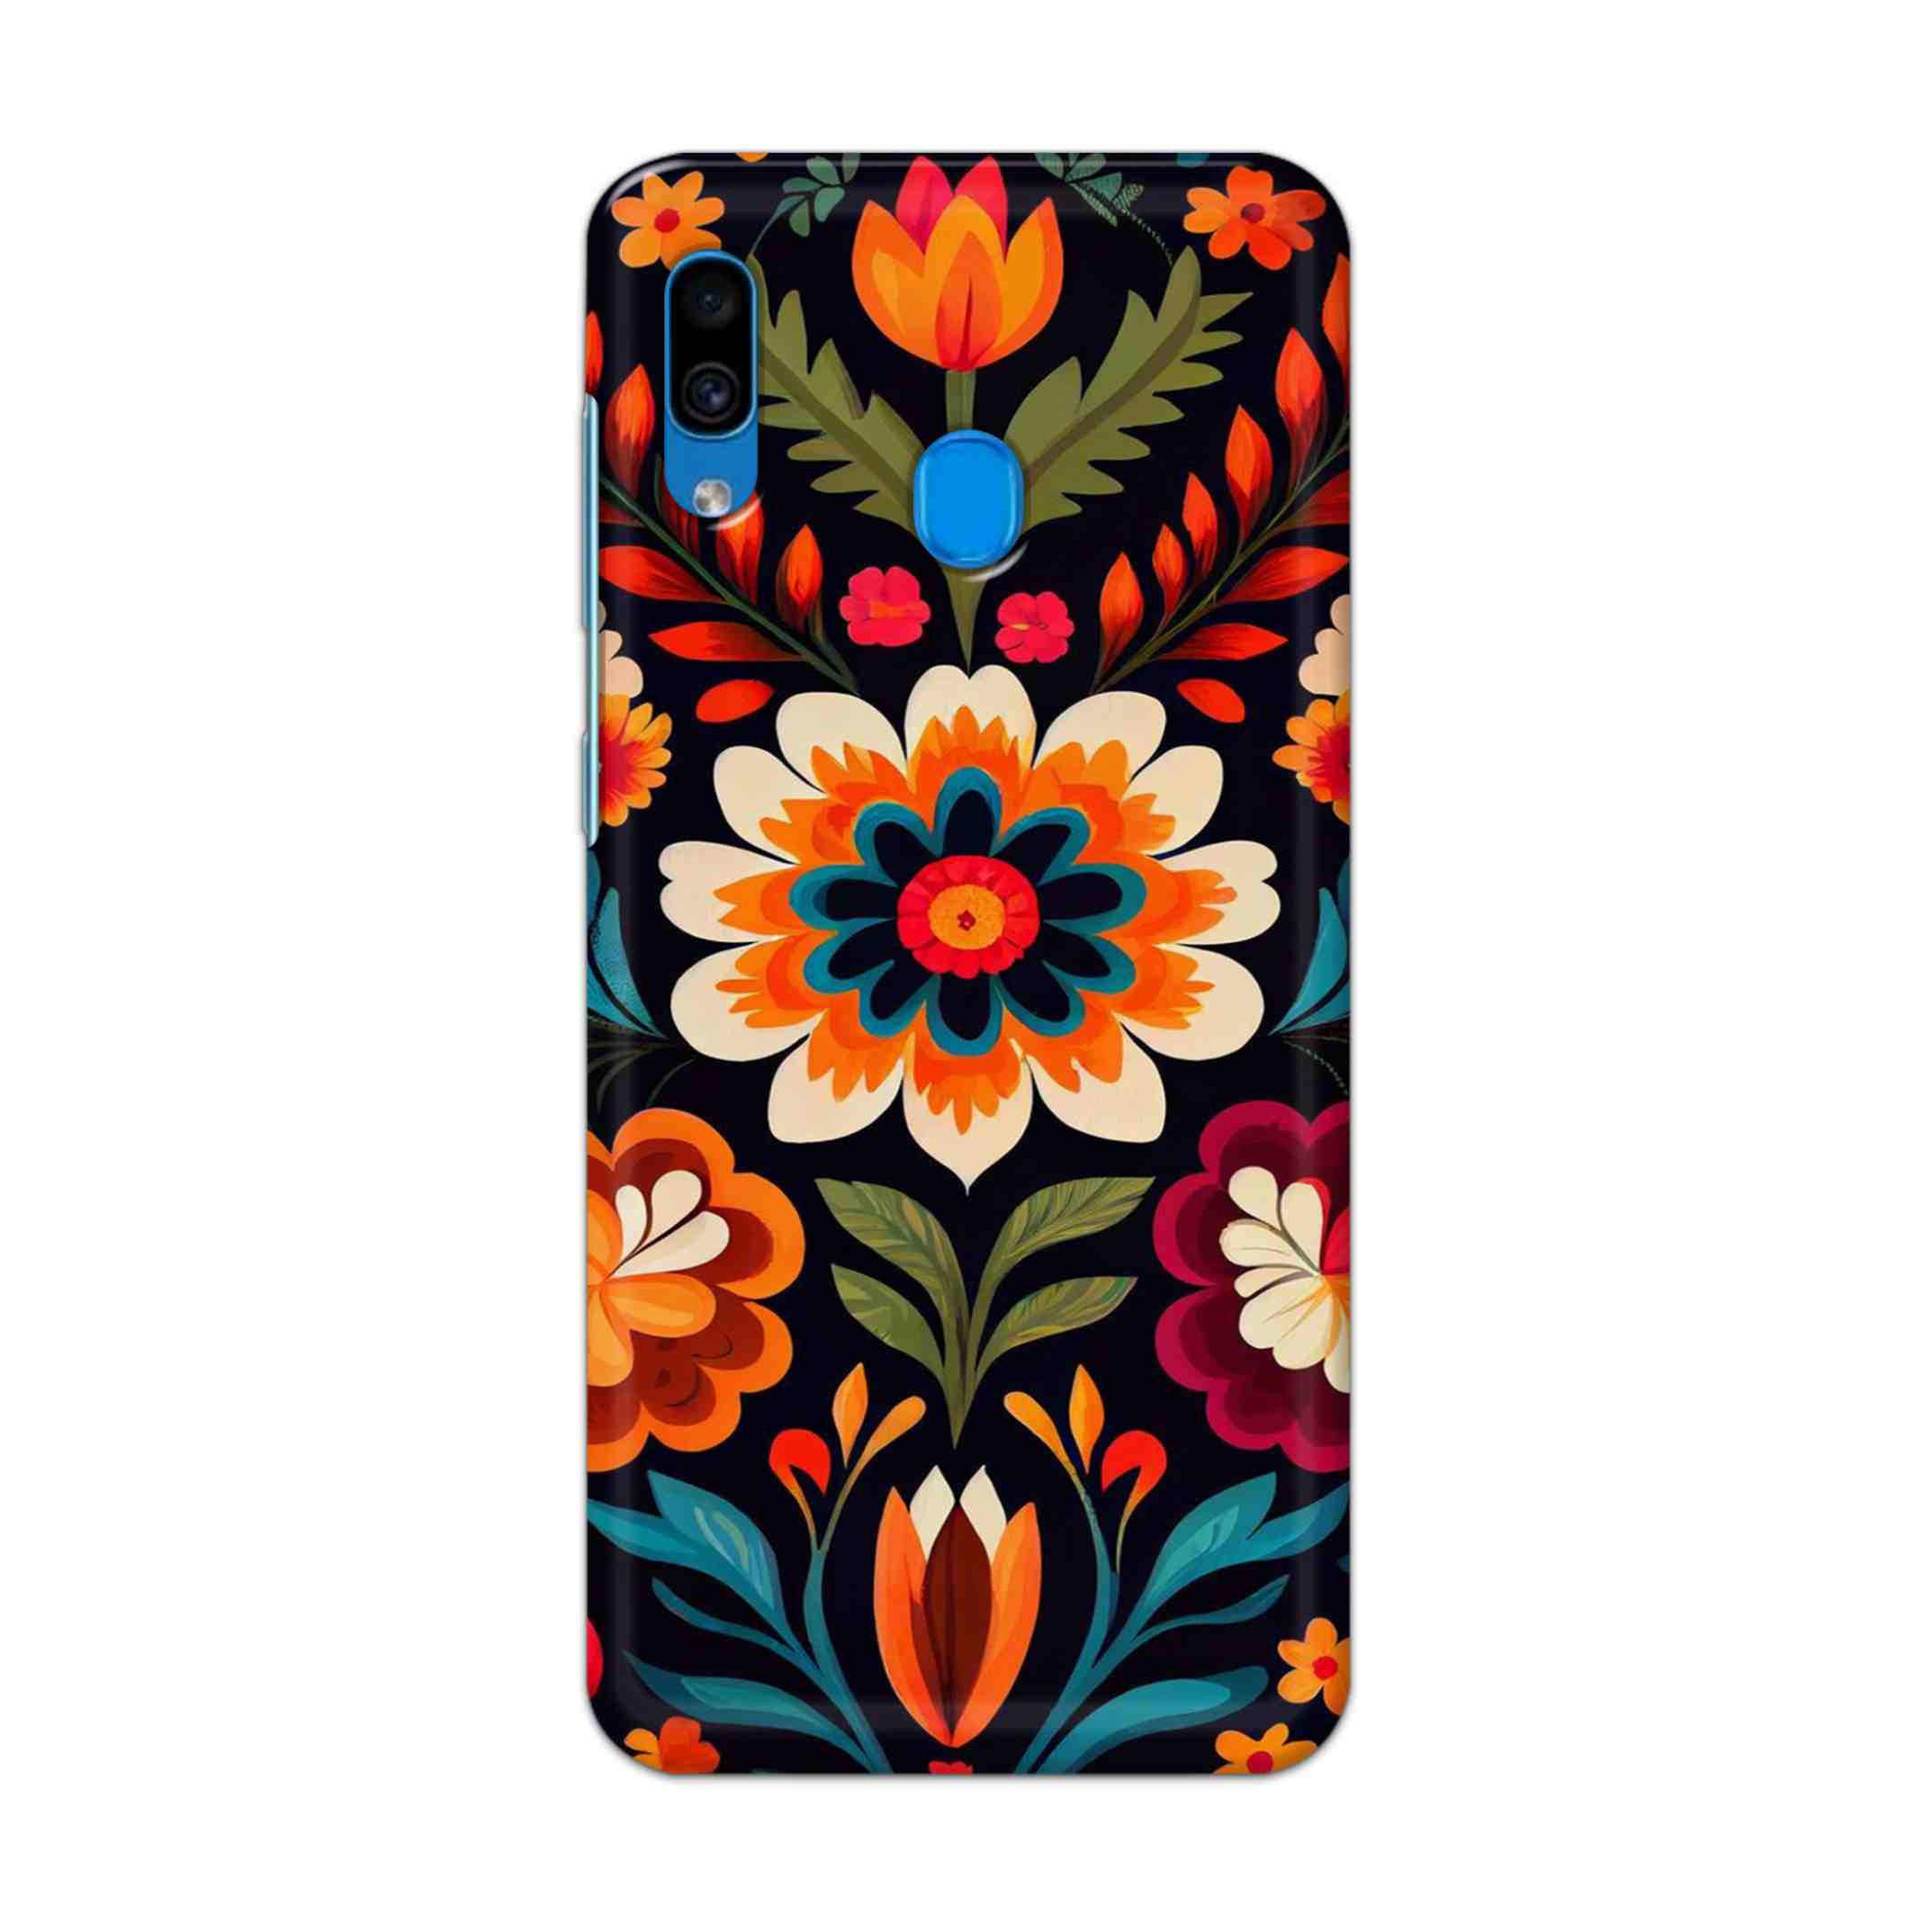 Buy Flower Hard Back Mobile Phone Case Cover For Samsung Galaxy A30 Online